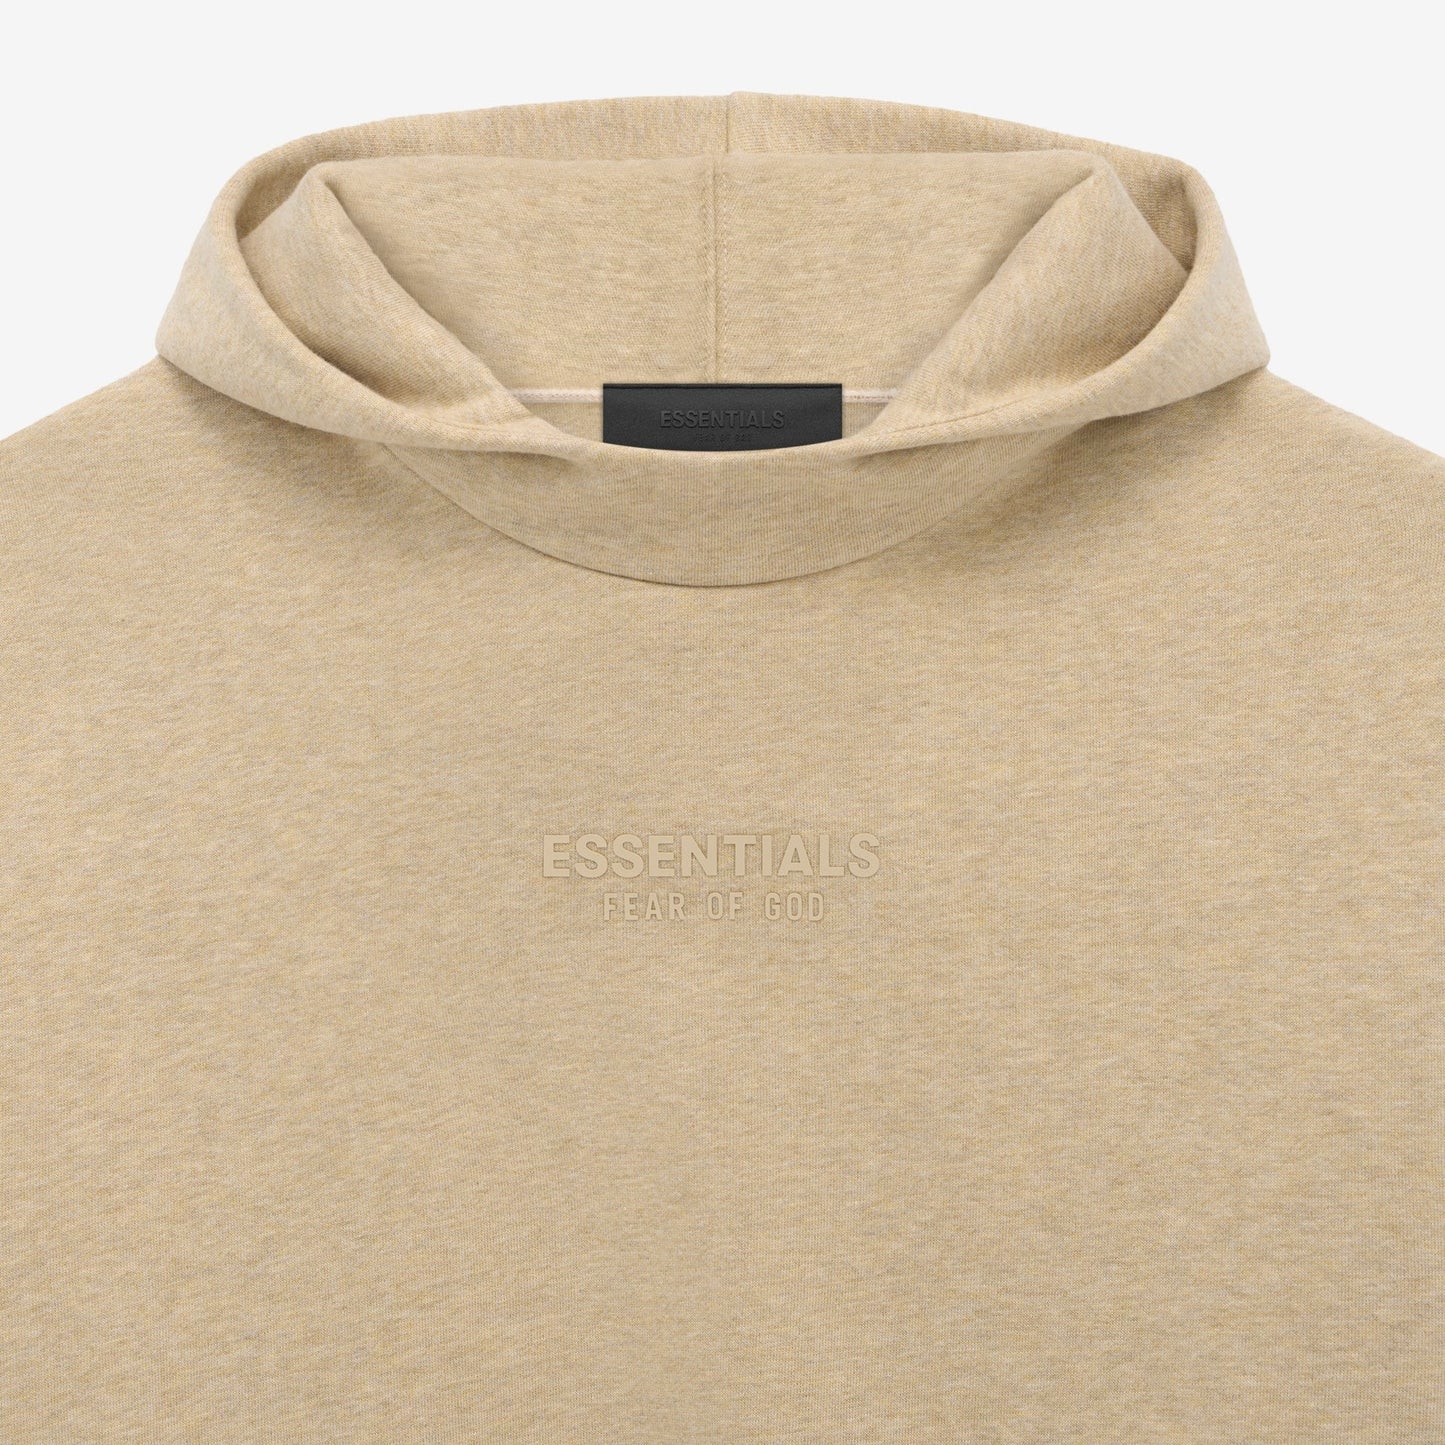 Fear of God Essentials Gold Heather Hoodie Close View